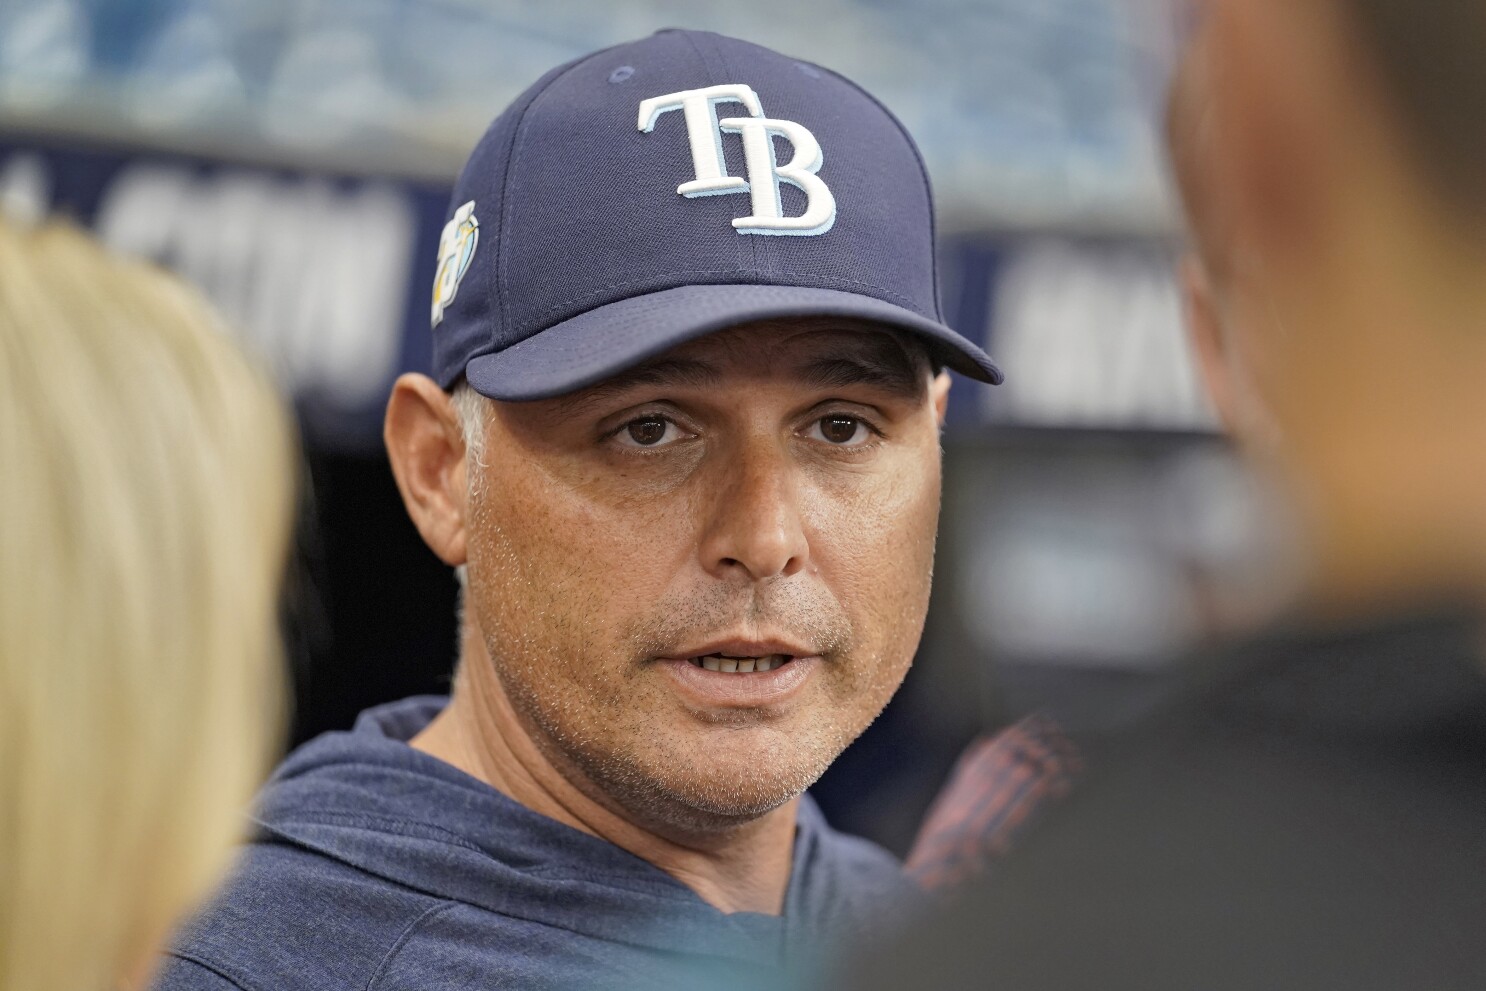 Rays making plans that don't include shortstop Wander Franco